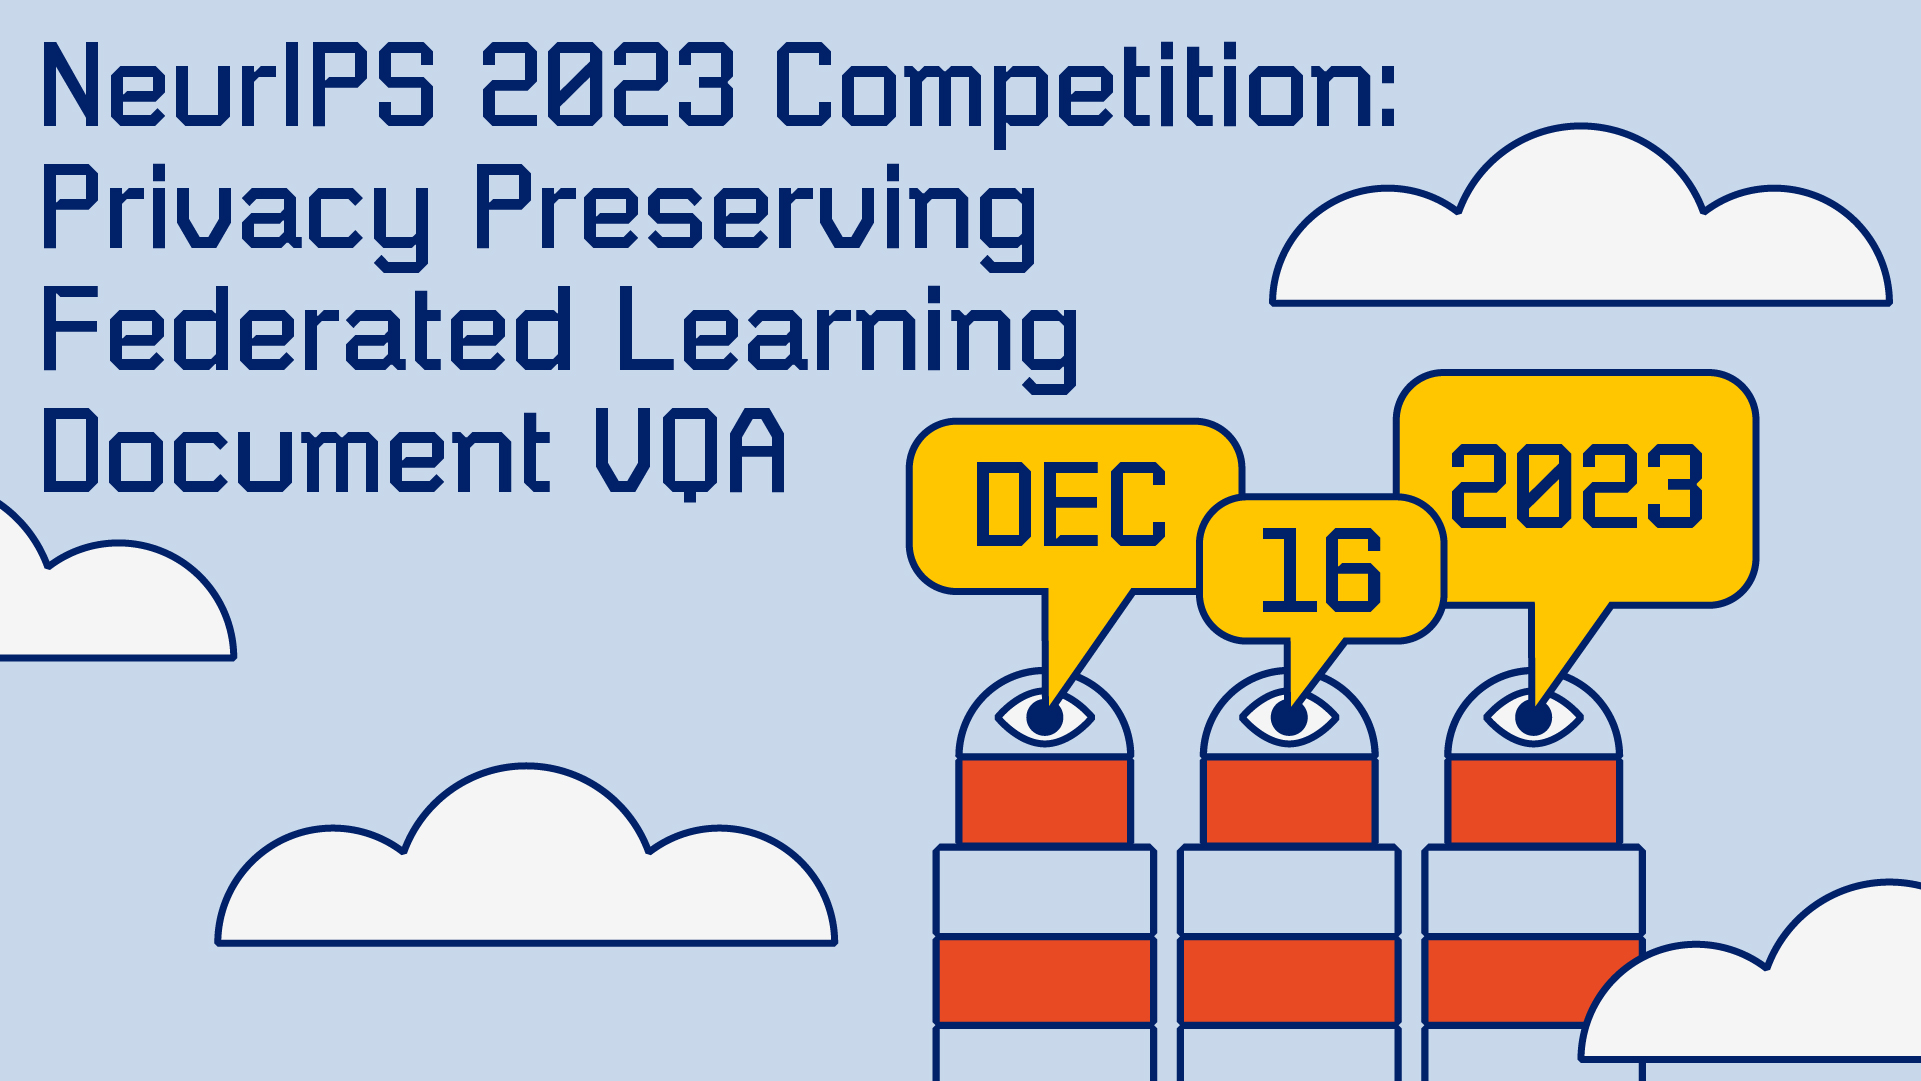 NeurIPS 2023 Competition: Privavy preserving Federated Learning Document VQA